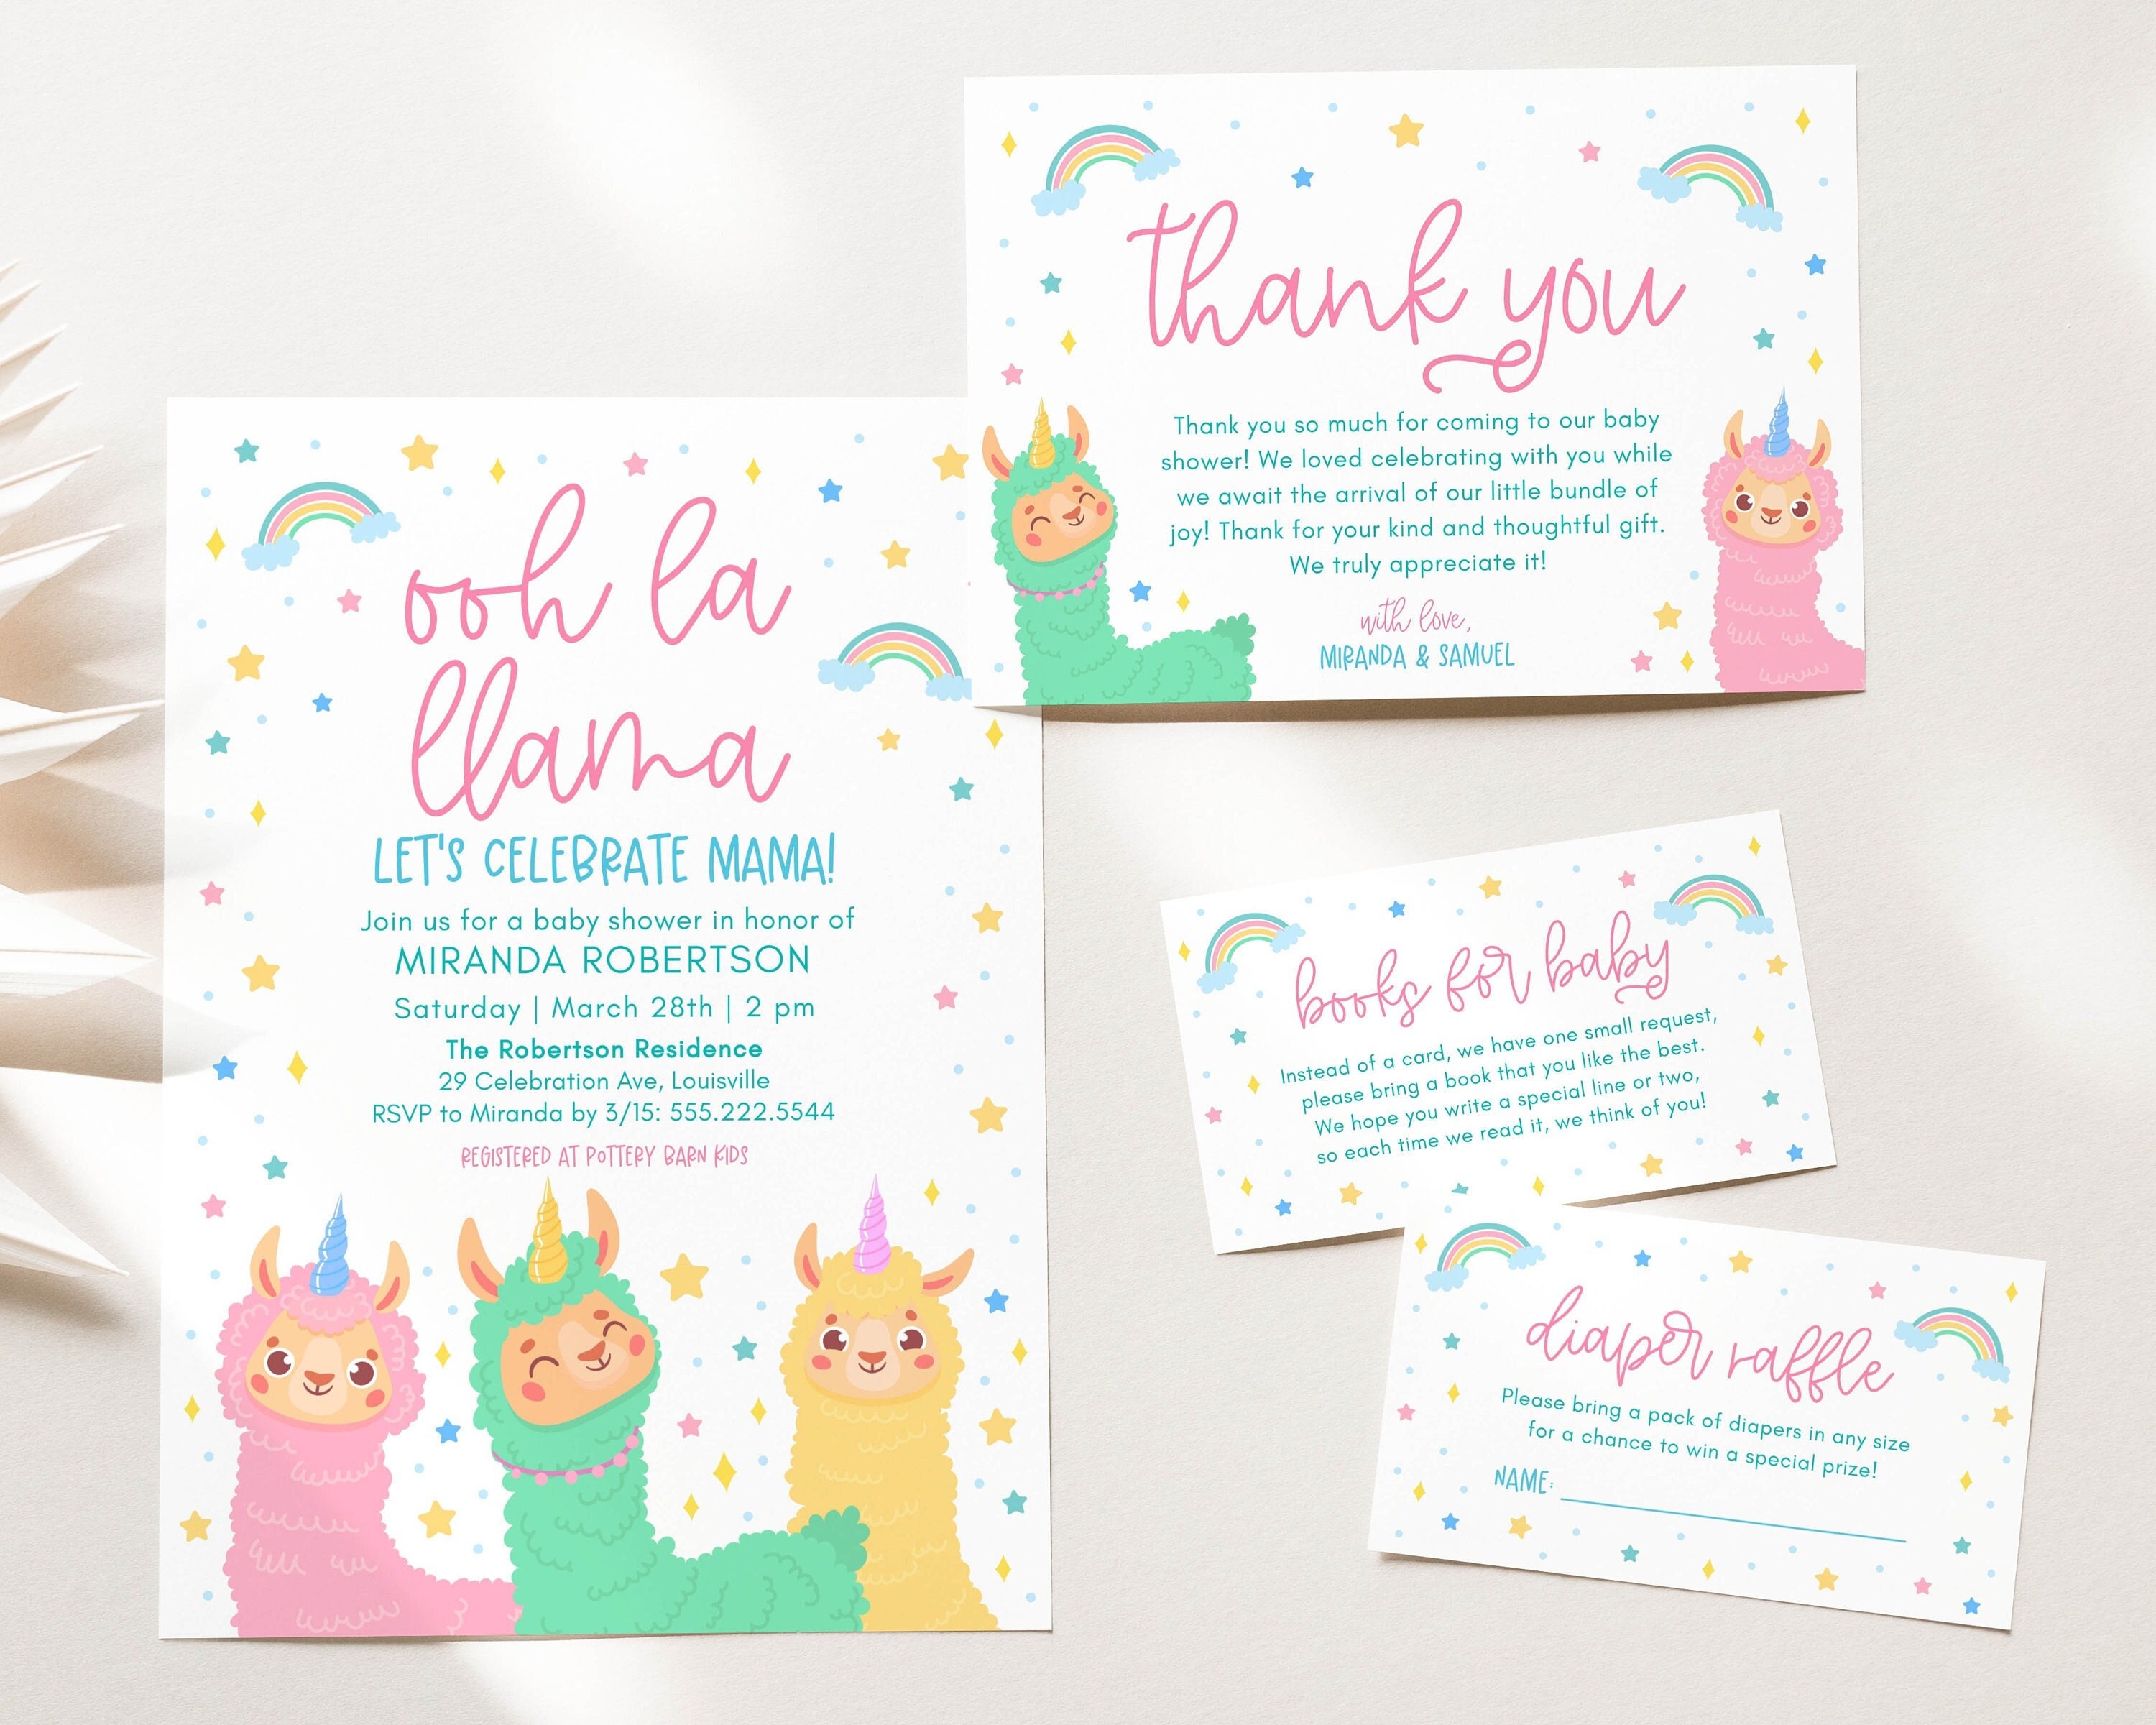 Thank You Card for The Time is Now Baby Shower Invitation